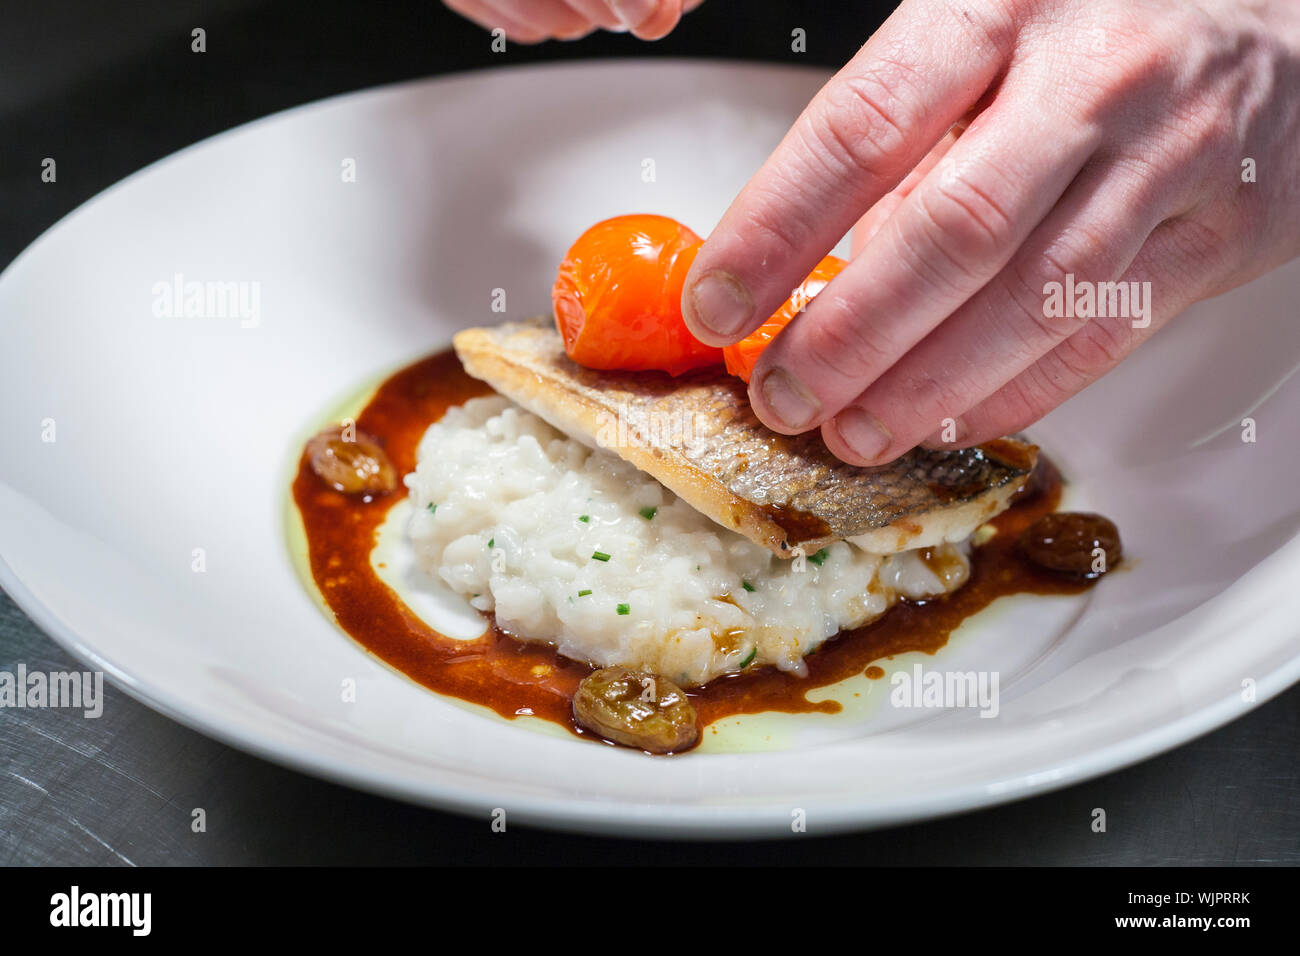 Food, in service, in restaurant or pub Stock Photo